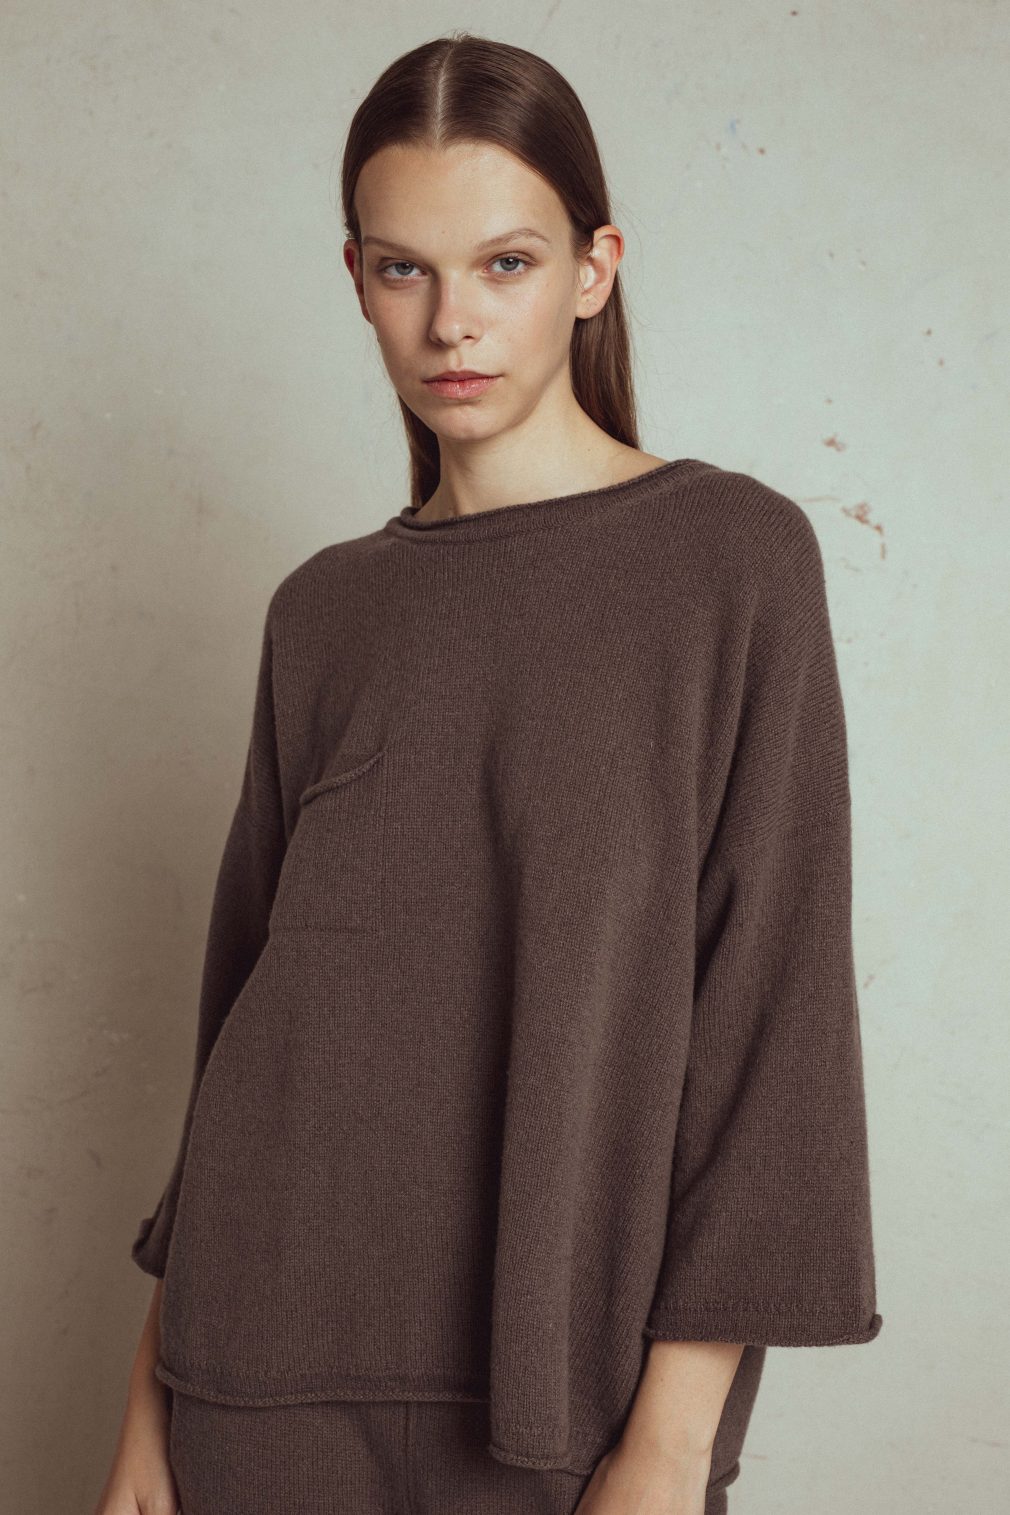 midweight, loose boxy fit sweater durer, round neck, 4/5 length sleeves with small pocket on chest, italian yarn, 90% merino wool,  10% cashmere